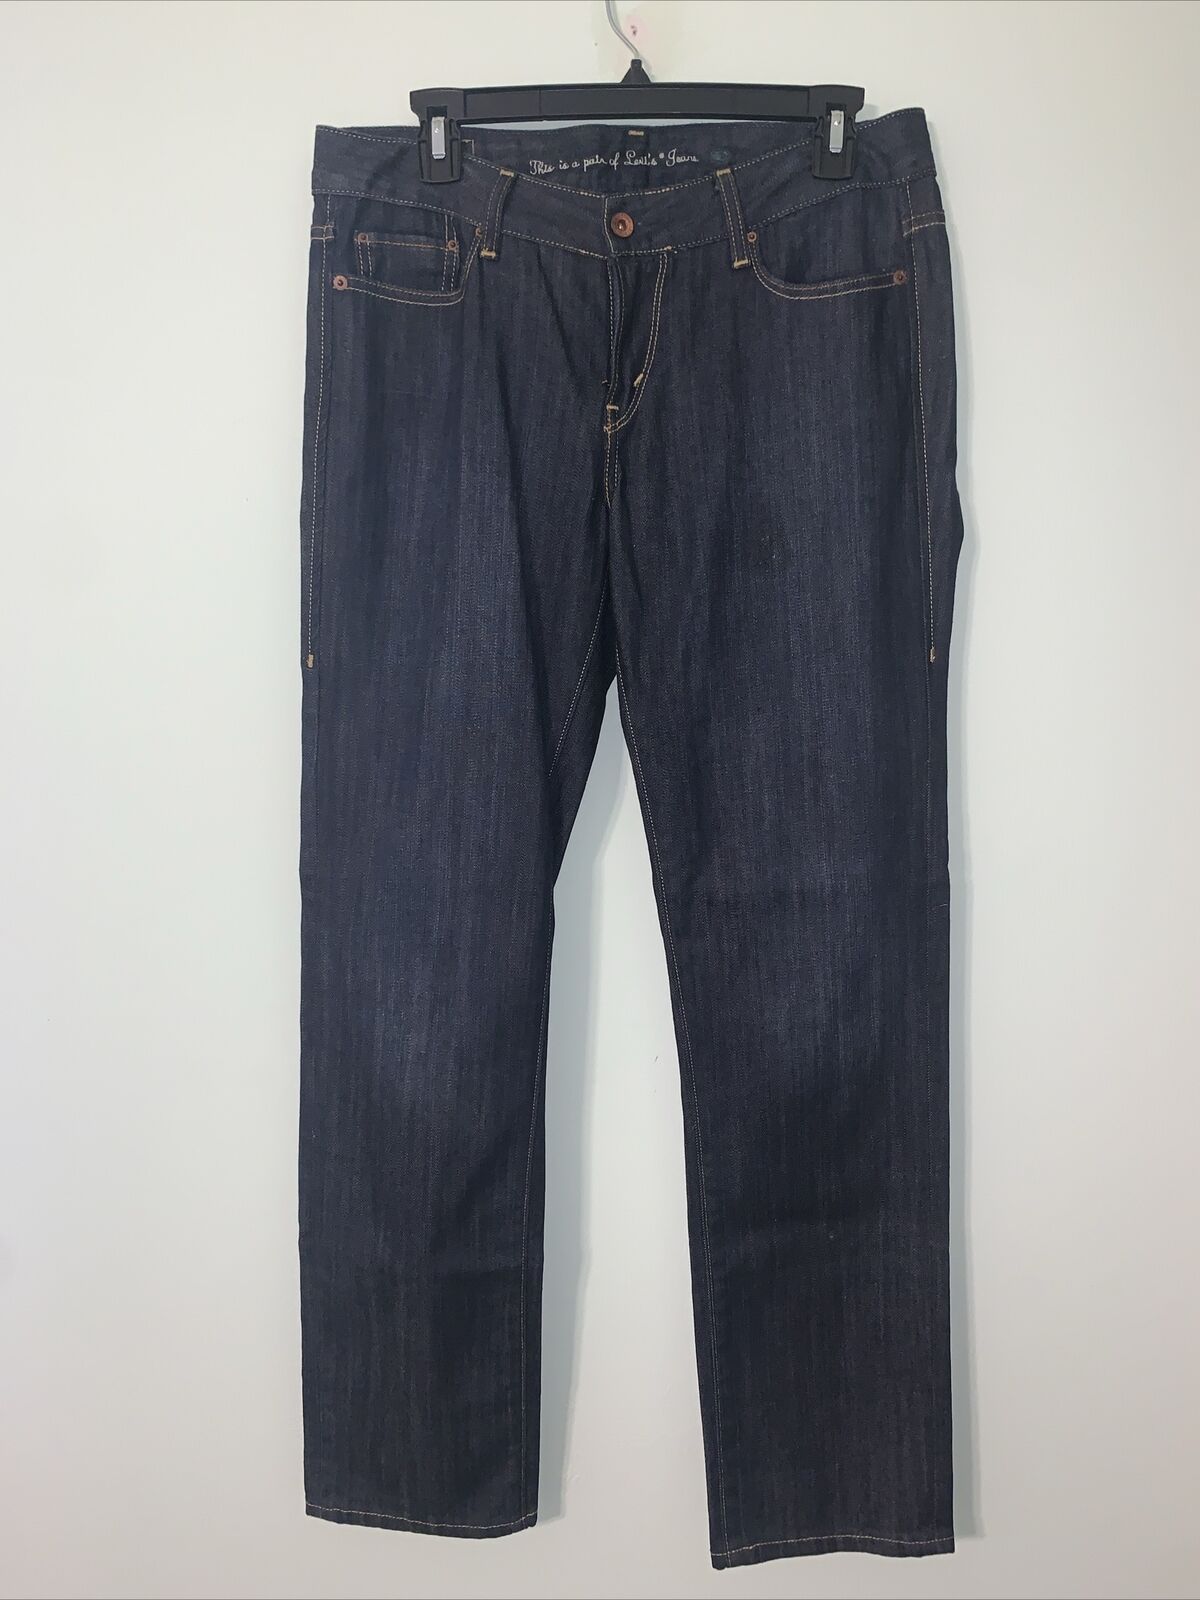 Levi’s 552 ECO Jeans 29” Size 8 Green Tab Recycle… - image 1